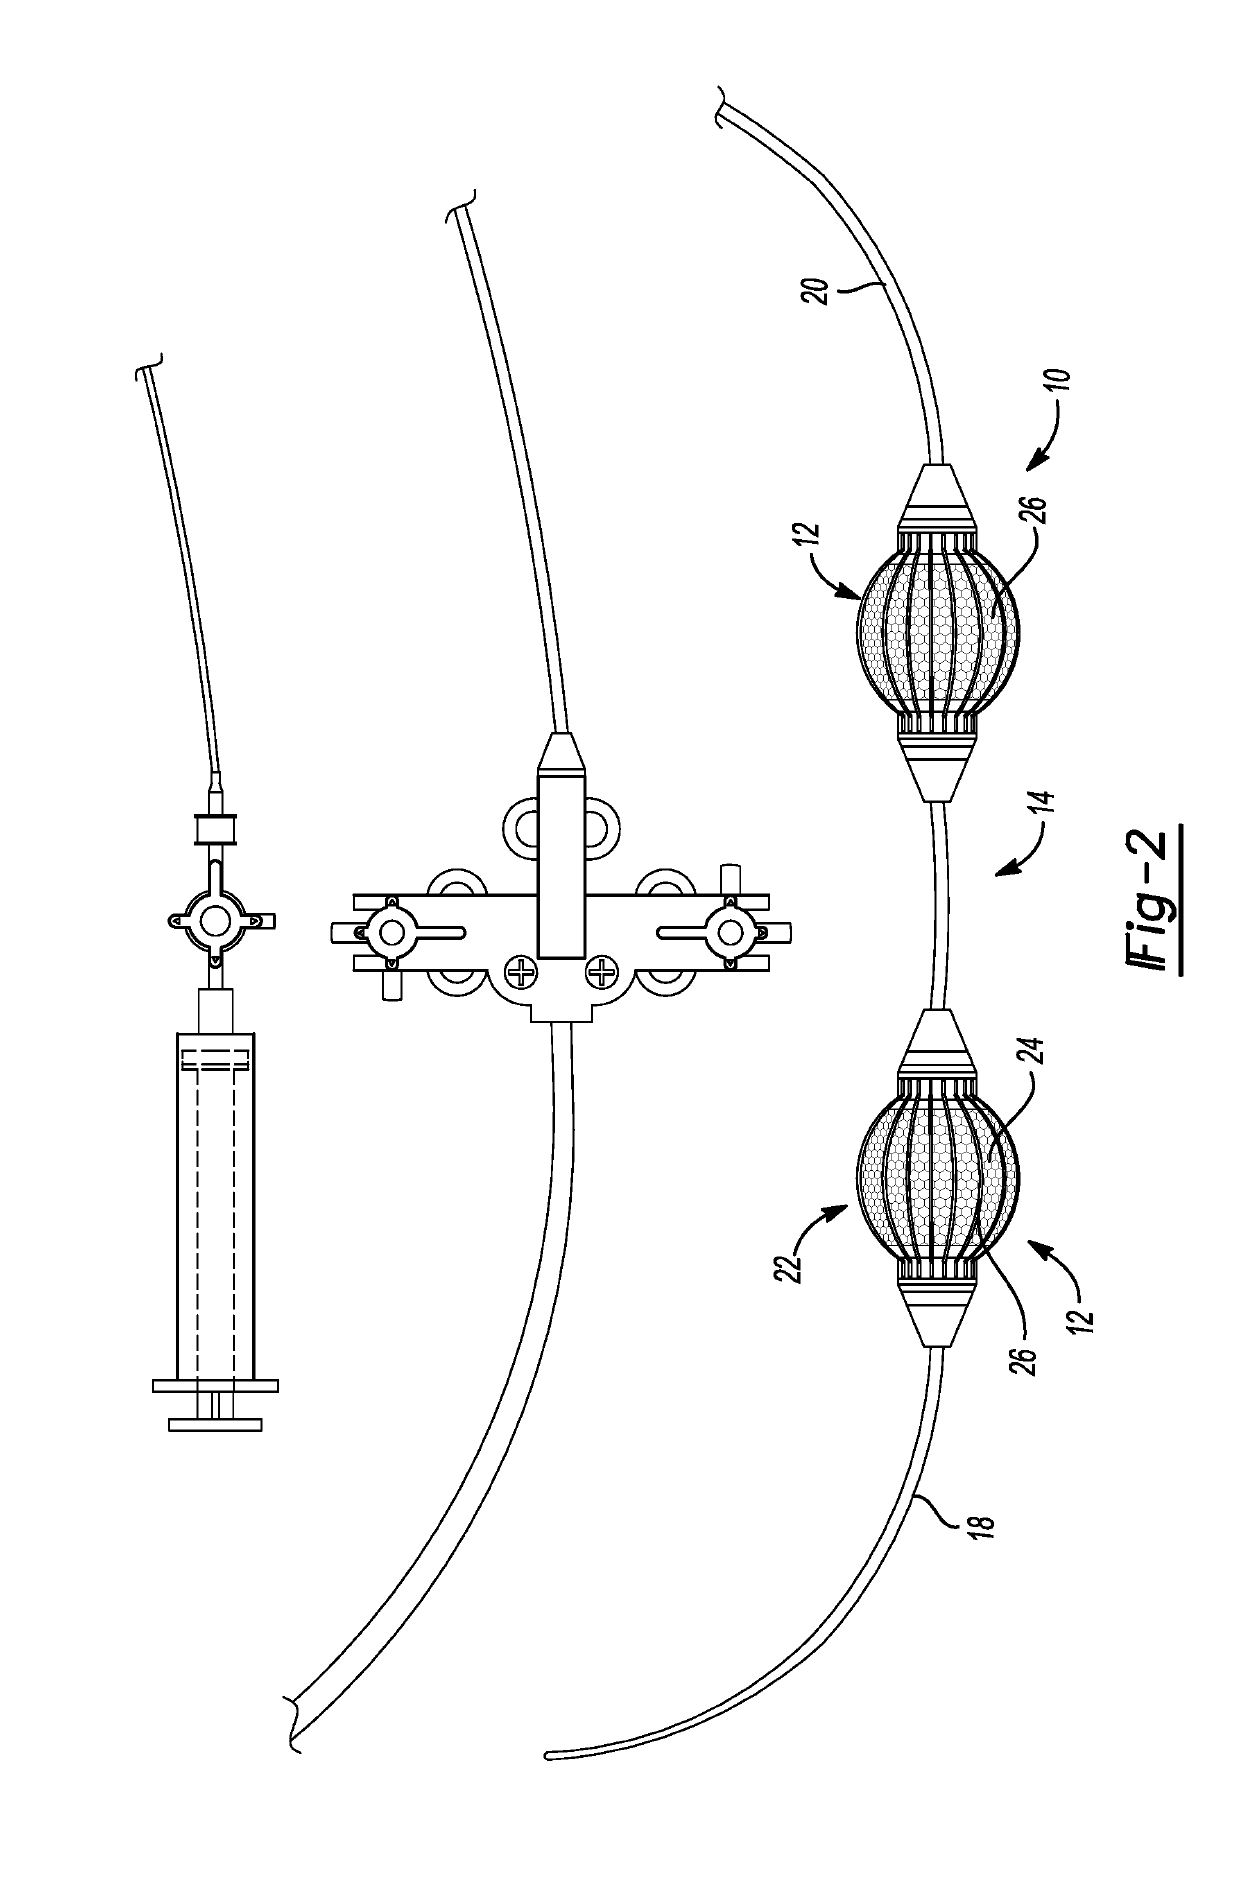 Mechanotransductive bowel extender device having local delivery of medically relevant liquids